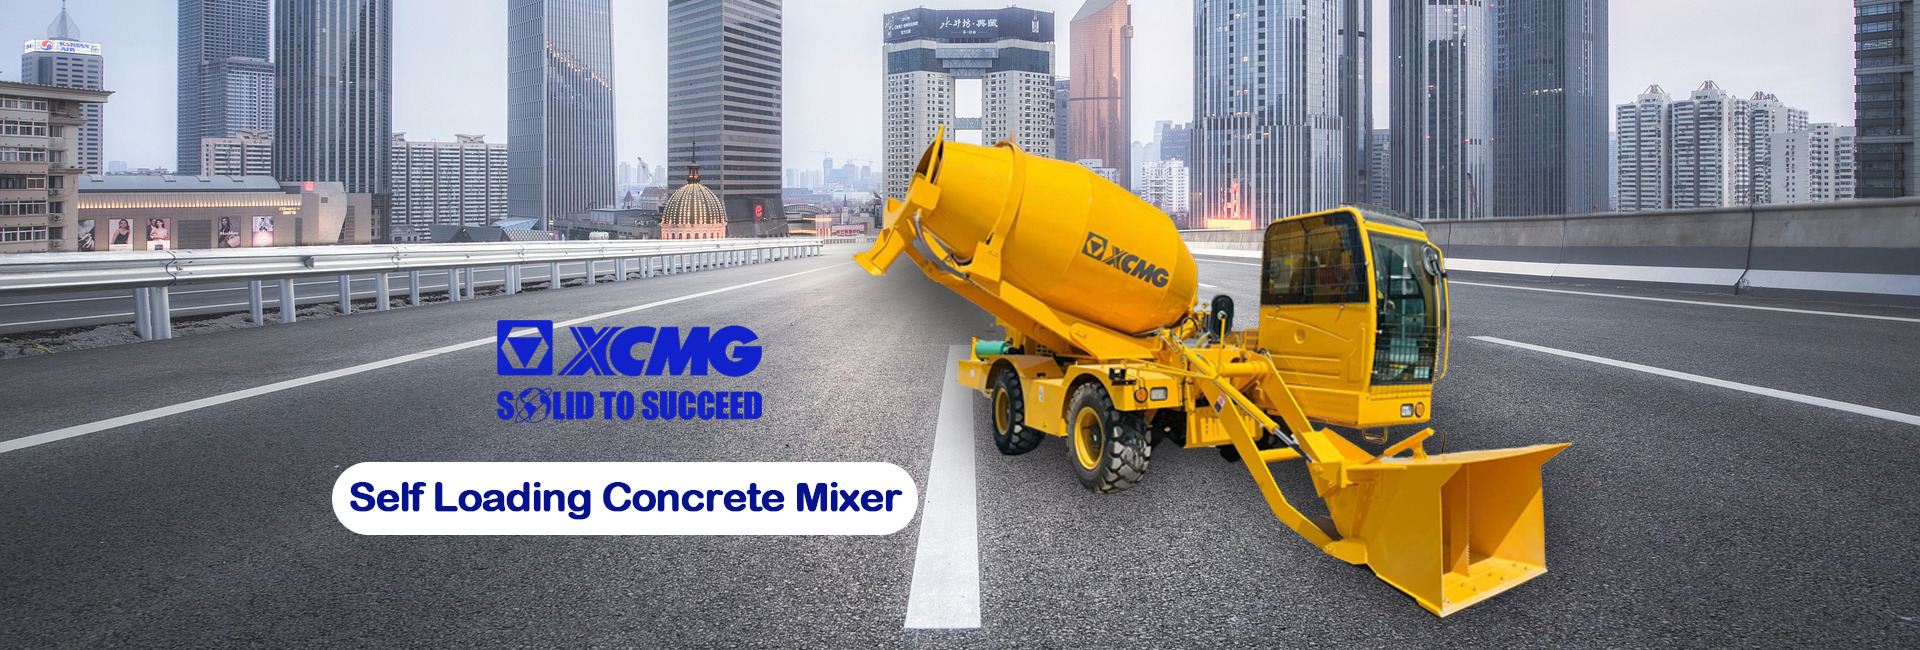 XCMG E-commerce Inc. - Construction machinery POTAIN undefined: picture 1